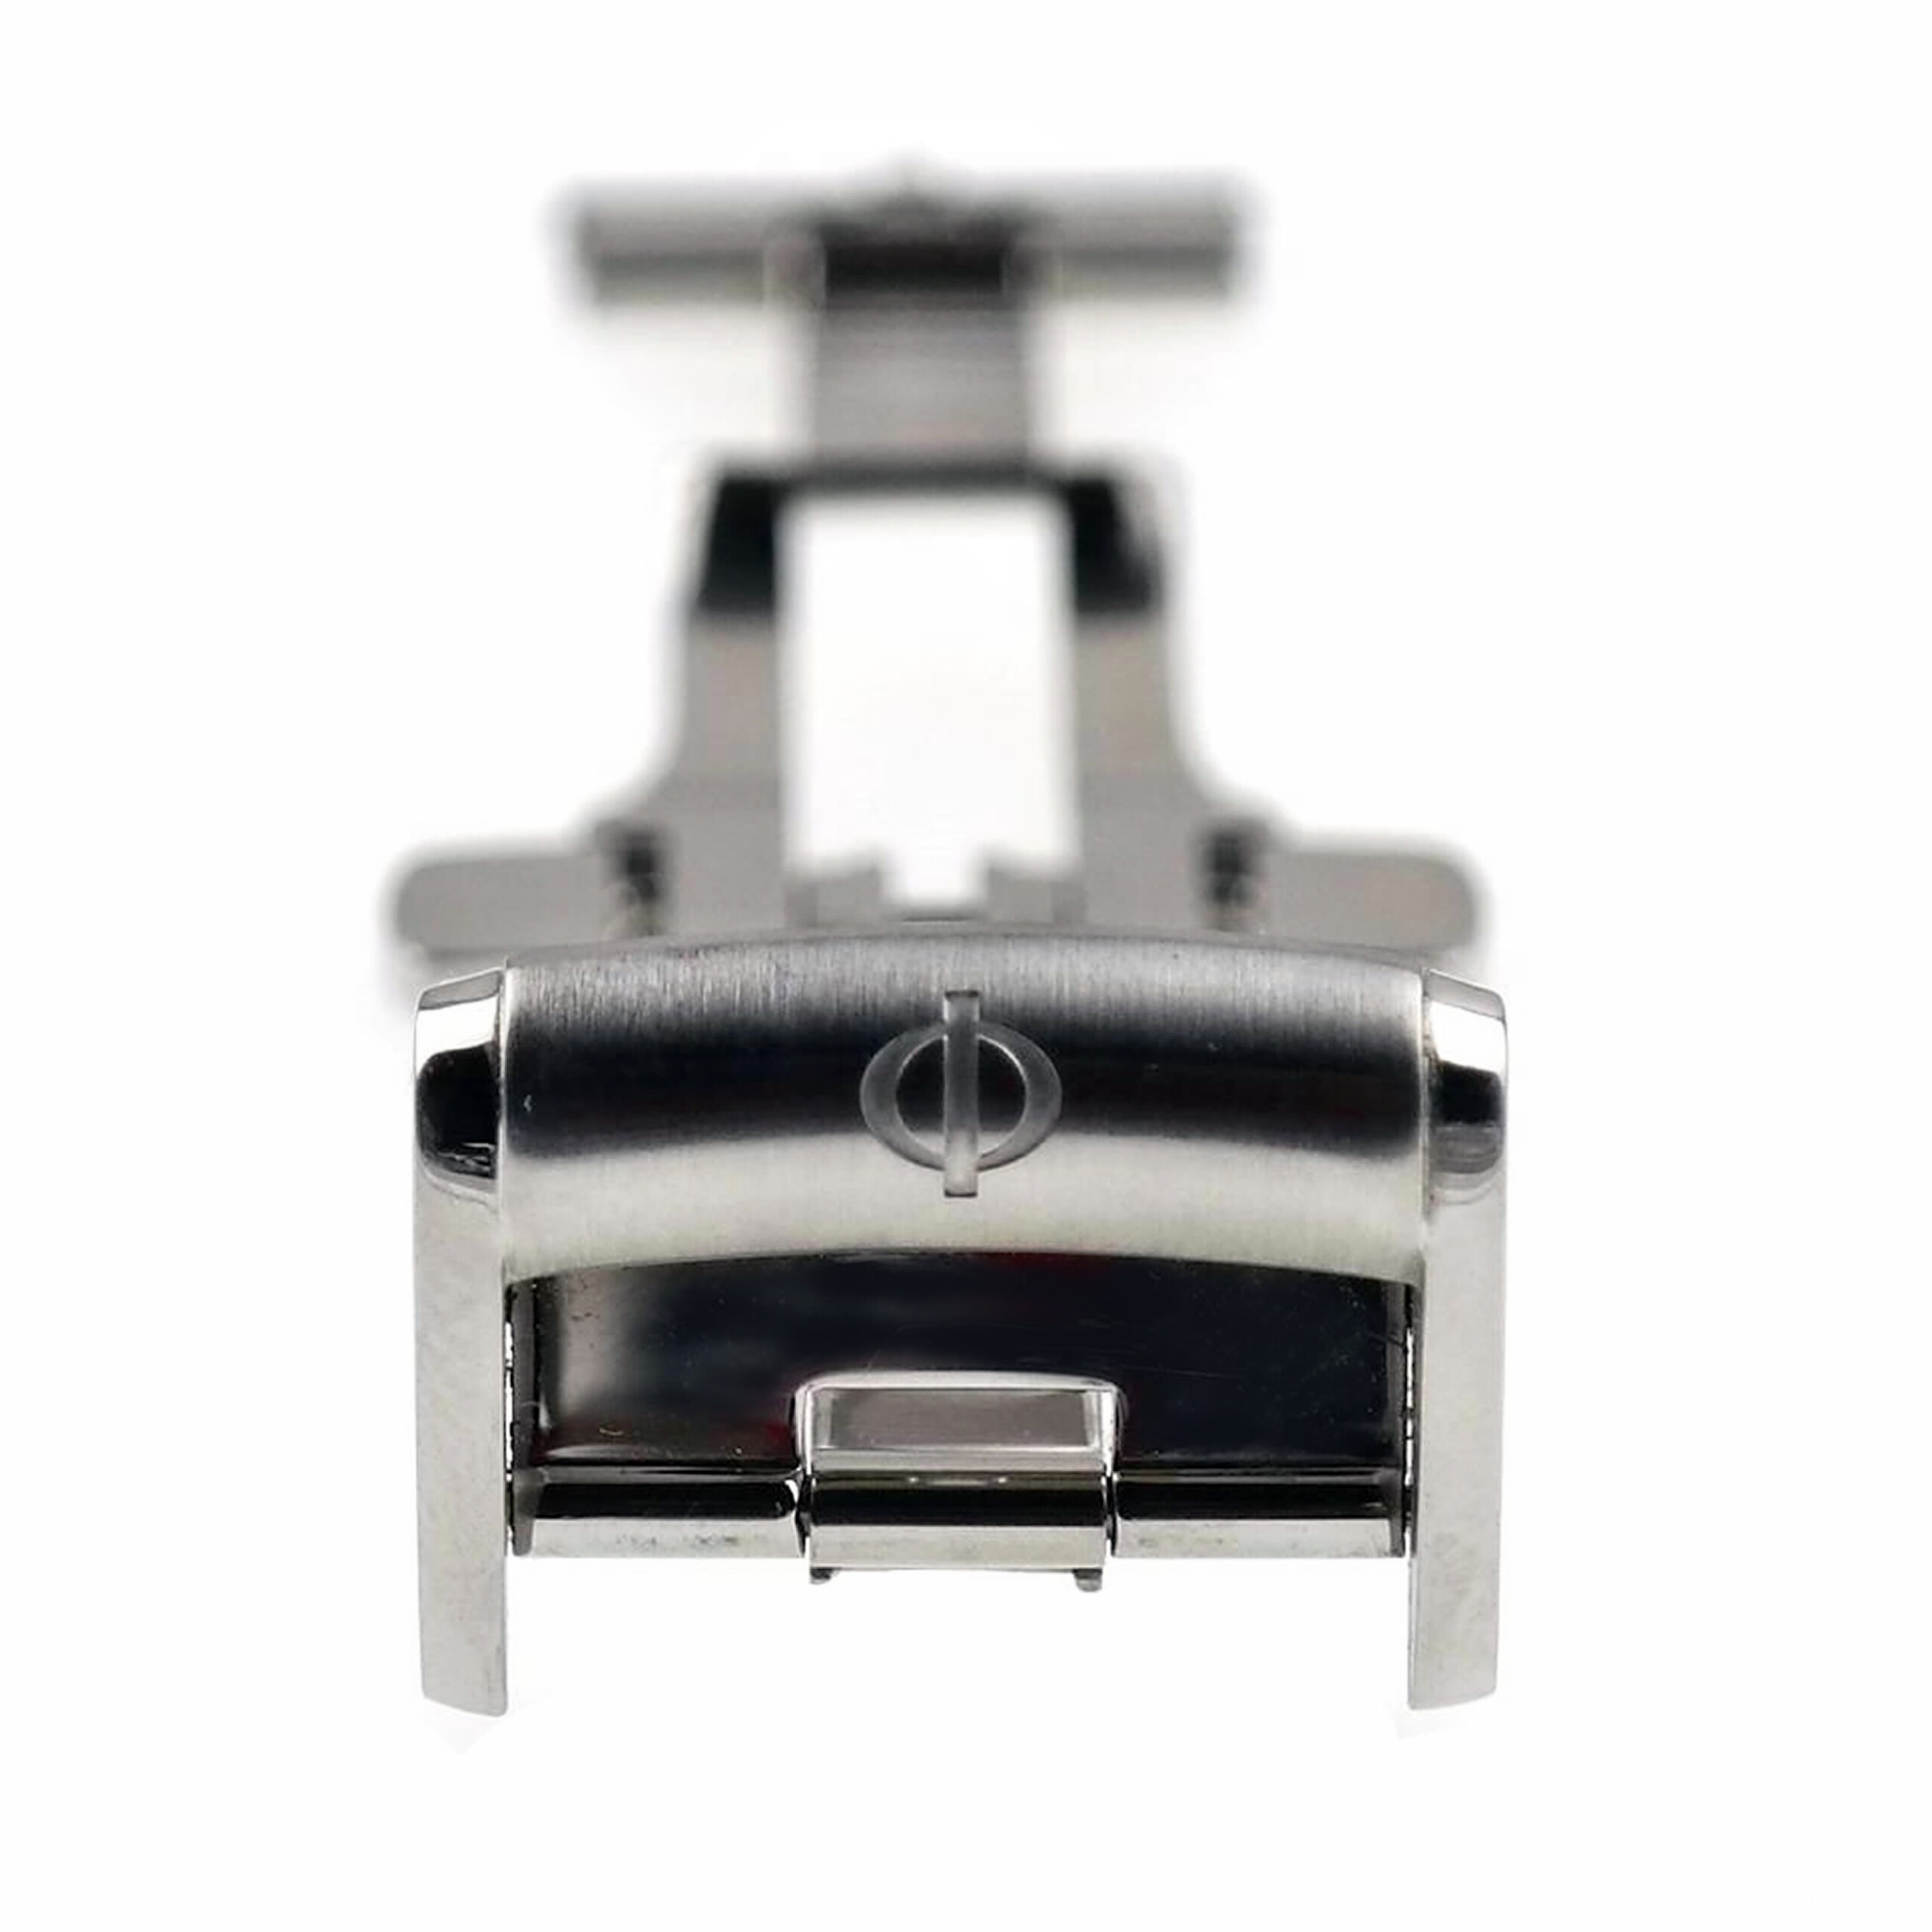 BAUME & MERCIER - Deployant (Folding) Clasp - Stainless Steel - 18 mm